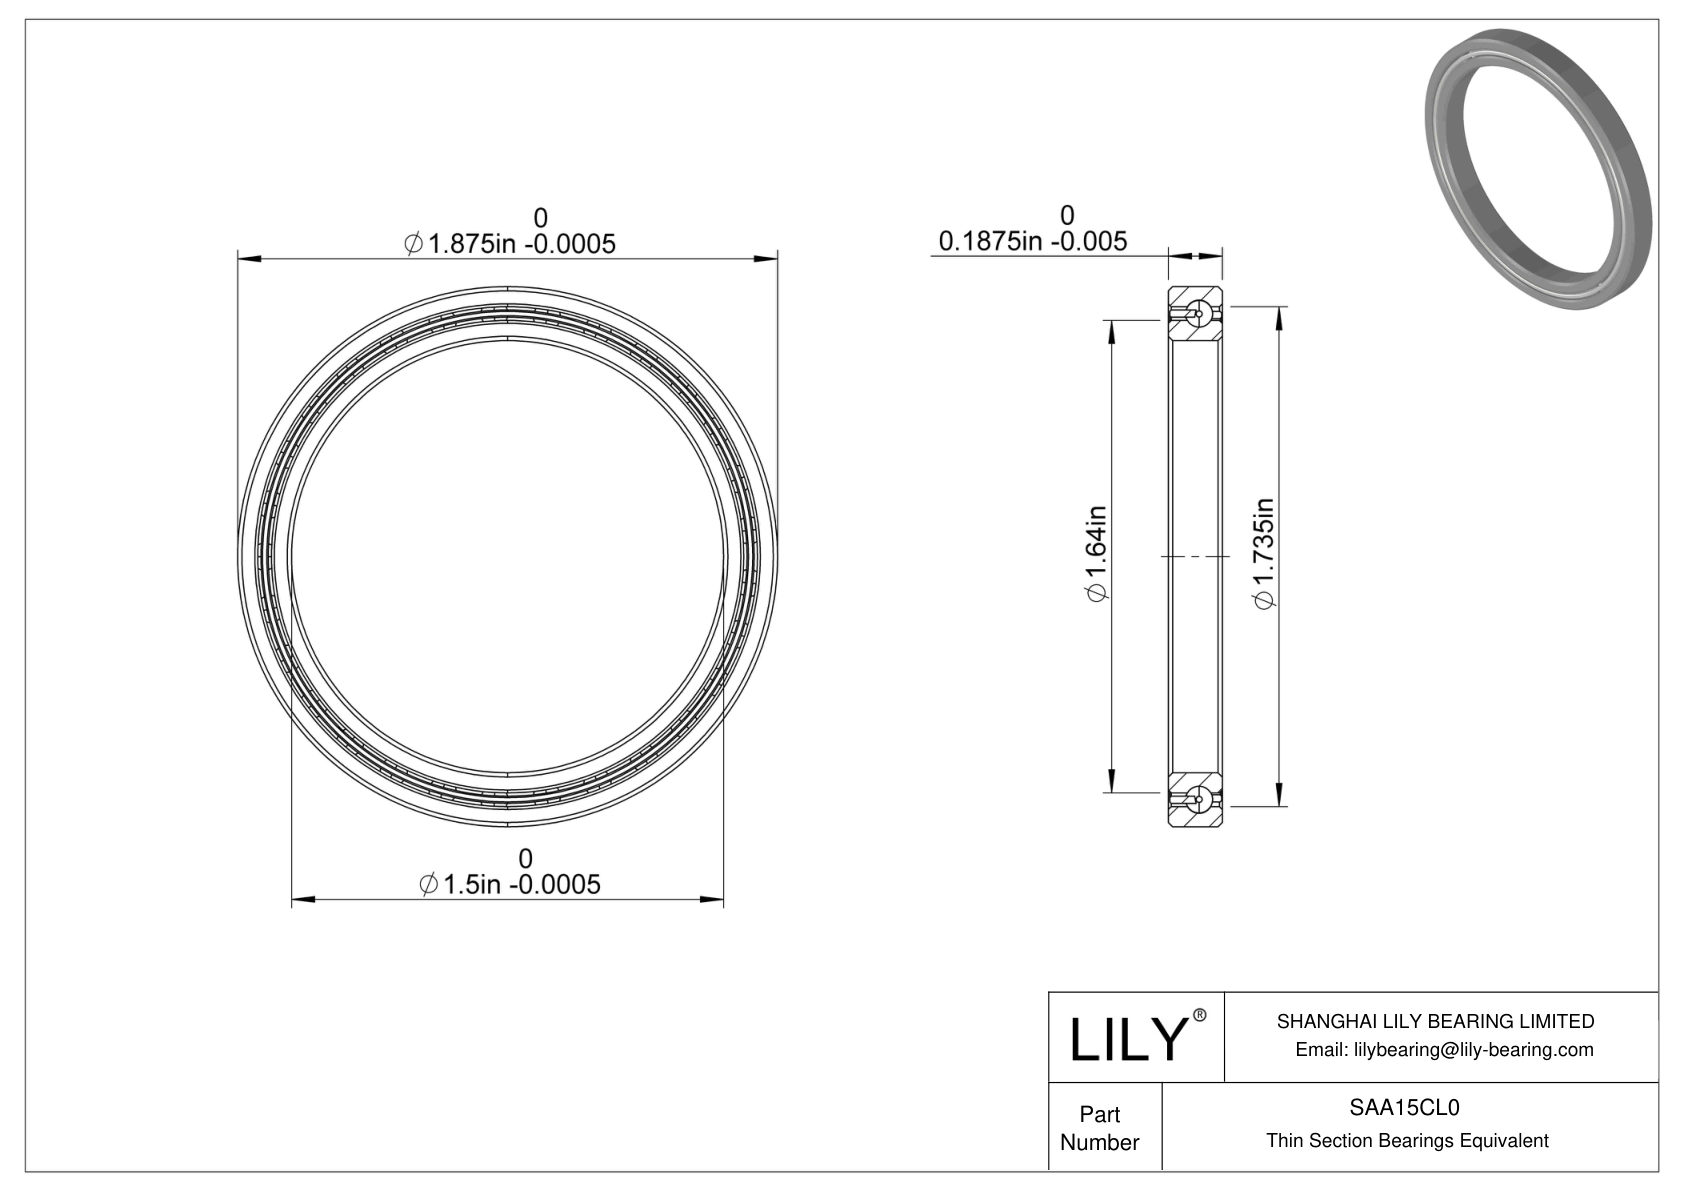 SAA15CL0 Constant Section (CS) Bearings cad drawing